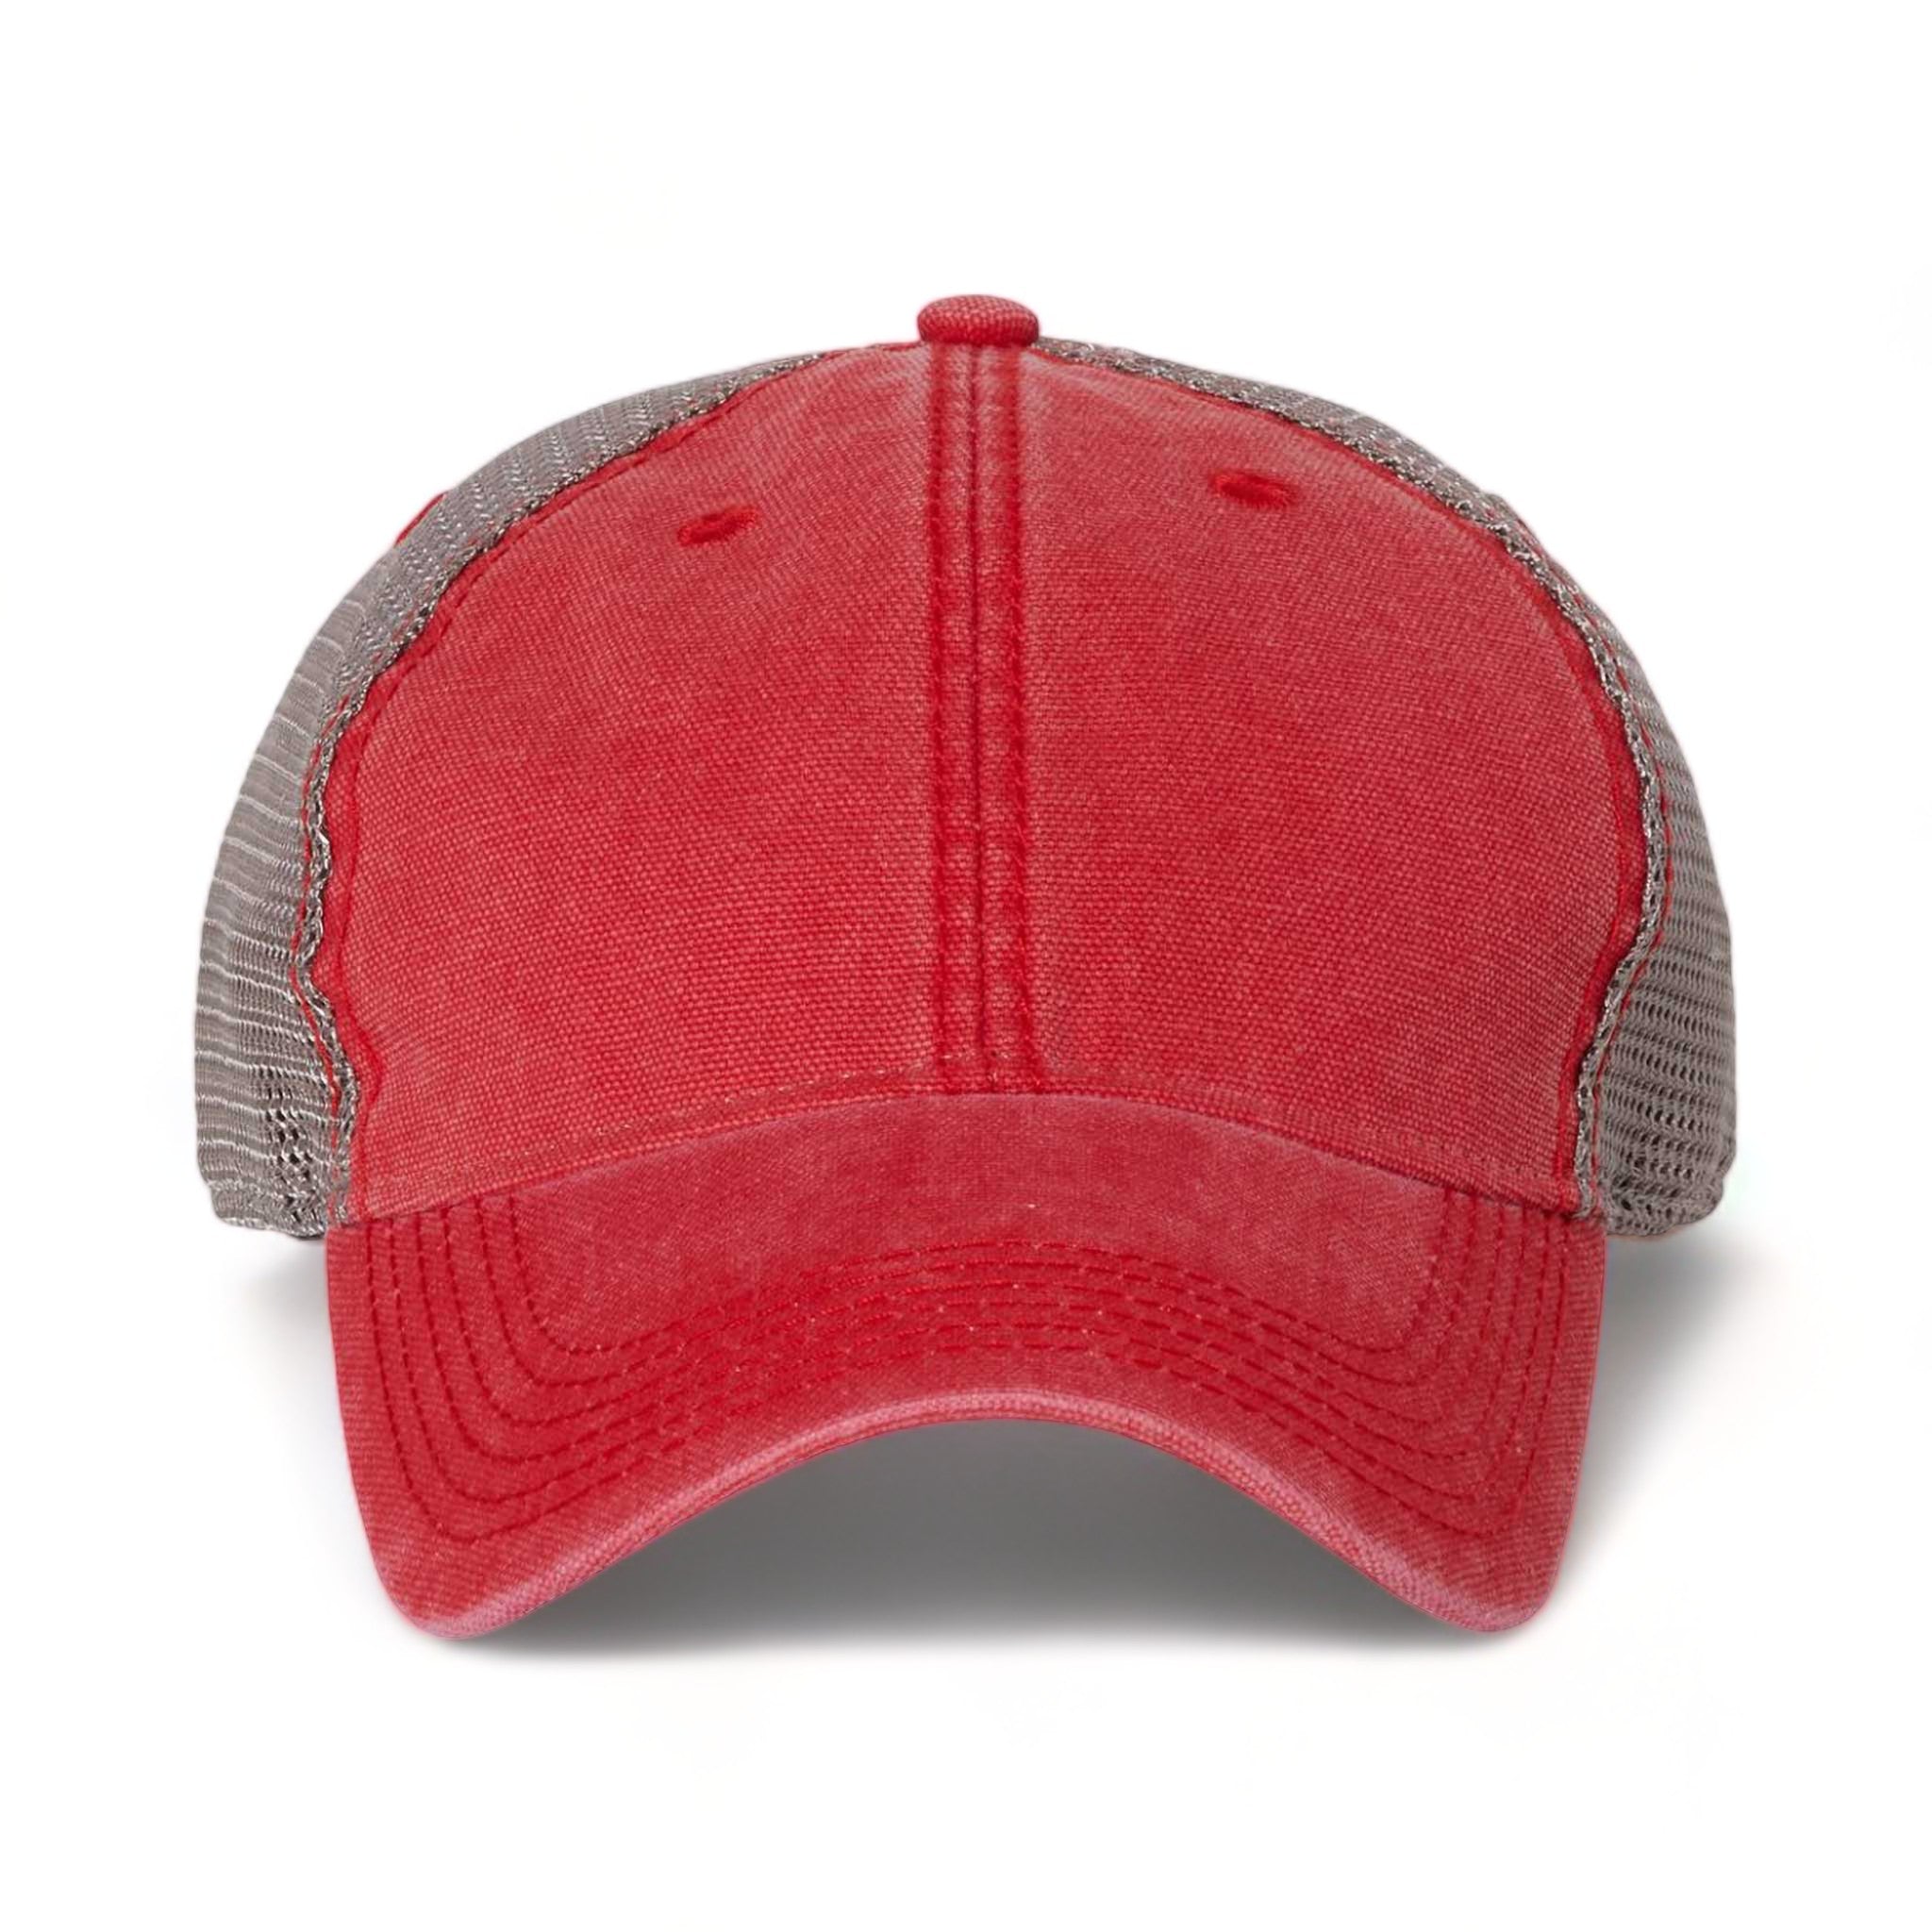 Front view of LEGACY DTA custom hat in scarlet red and grey